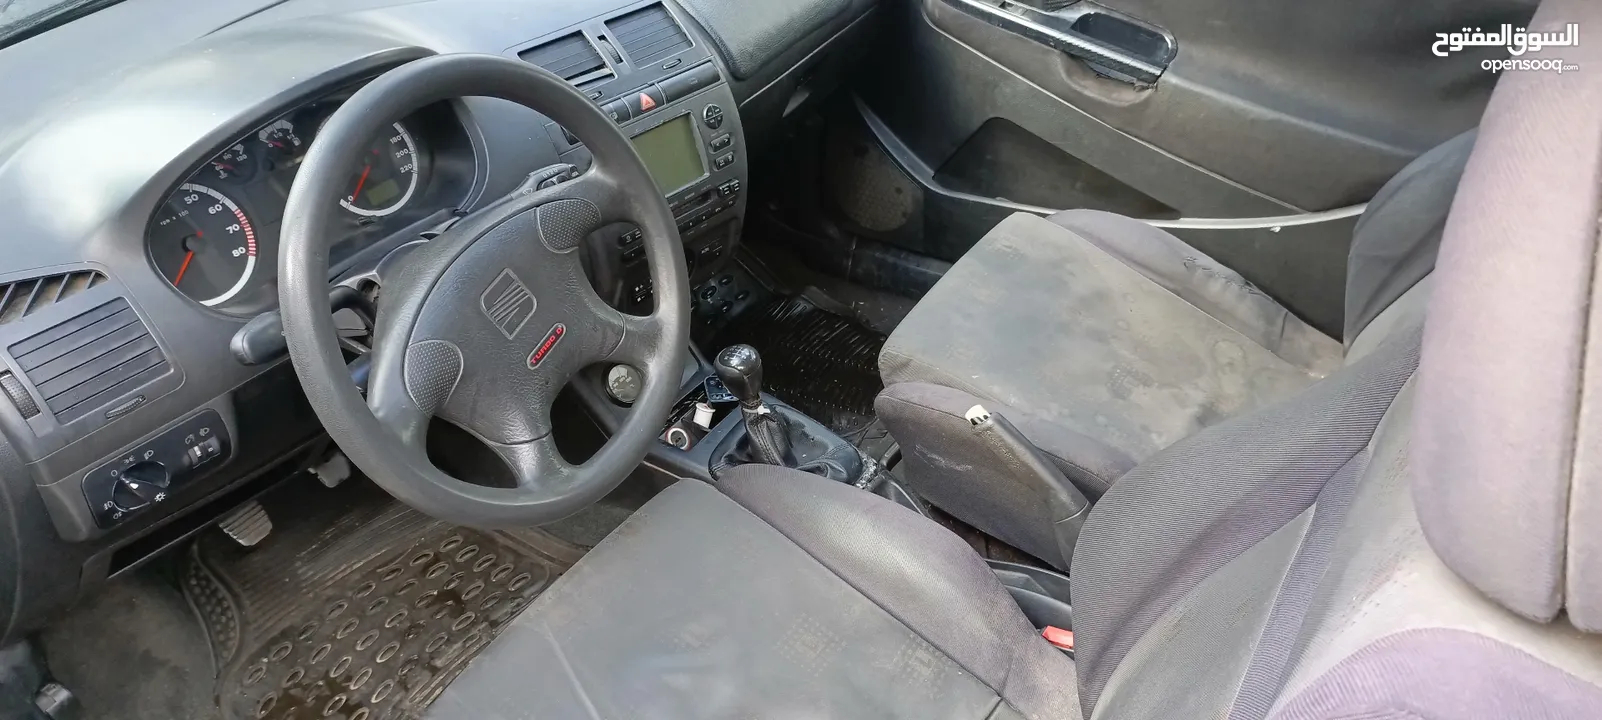 seat ibiza 2001 in good condition